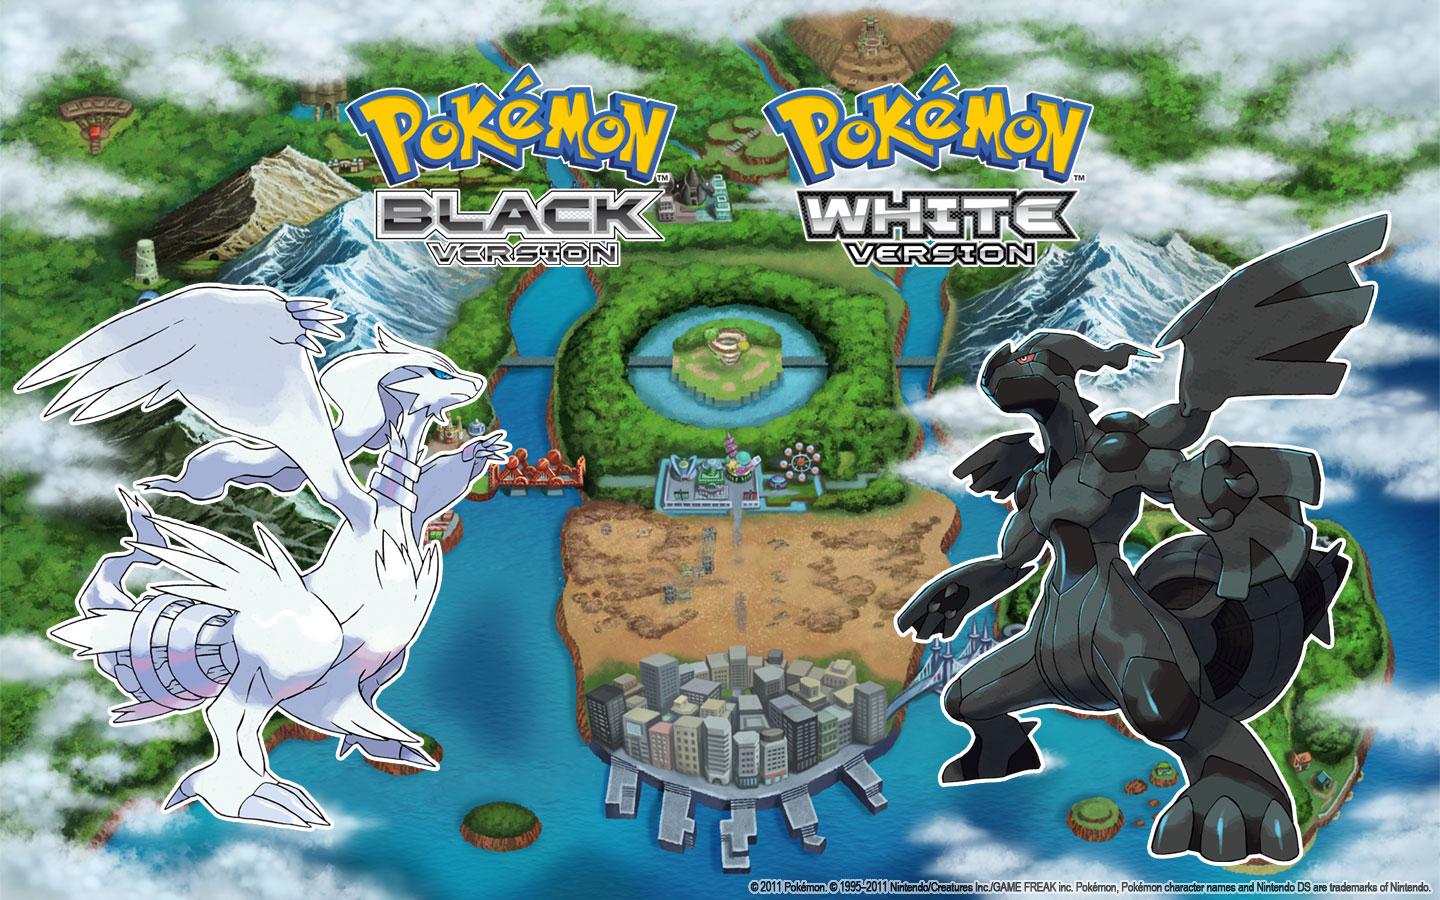 Zekrom and Reshiram heading to Pokemon Black / White on DS on March 10th